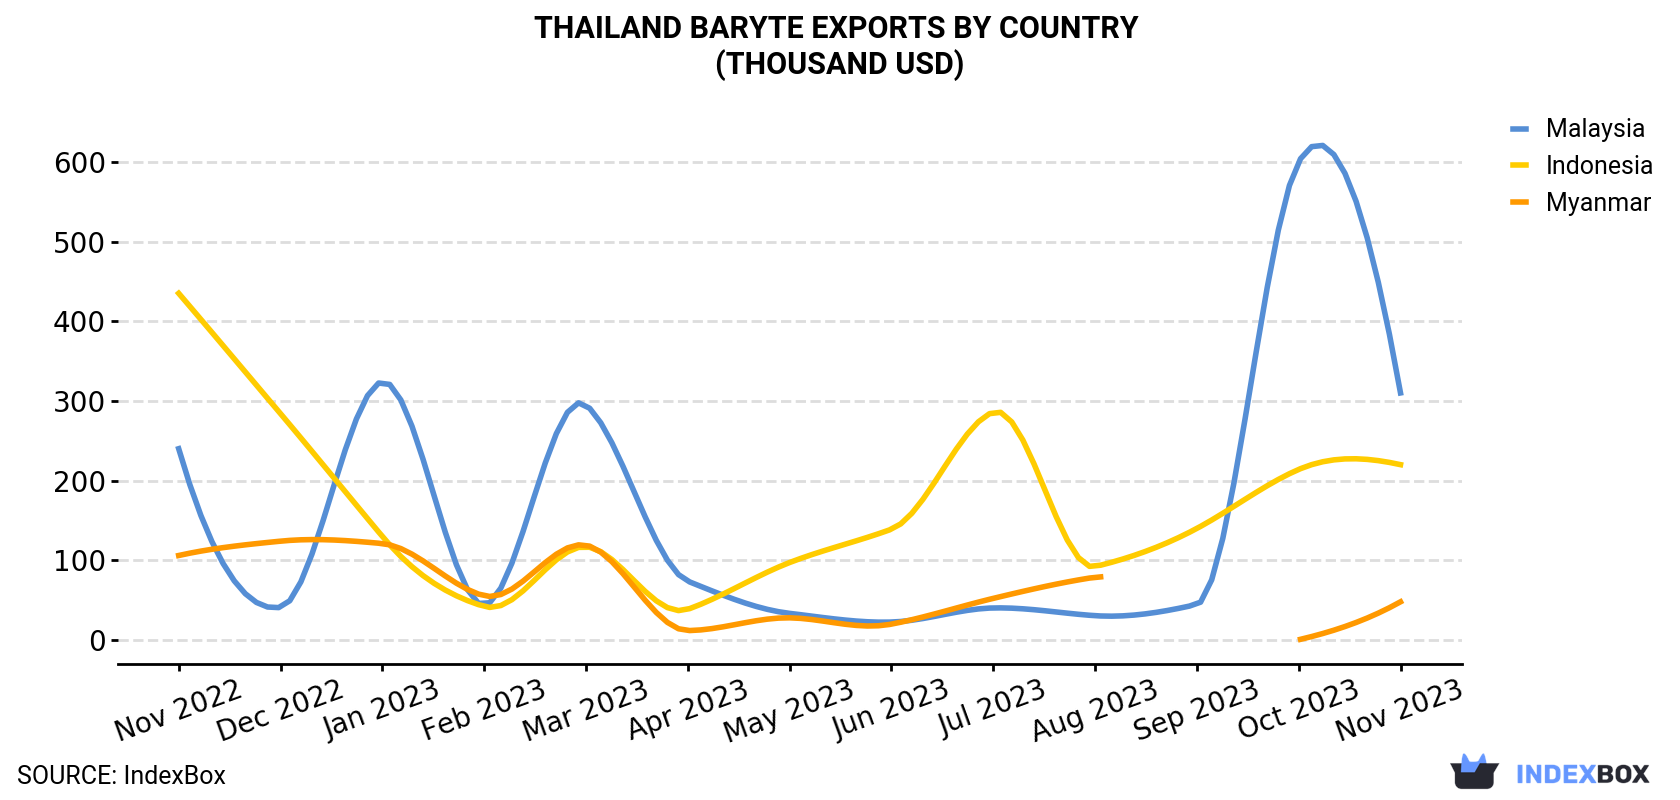 Thailand Baryte Exports By Country (Thousand USD)